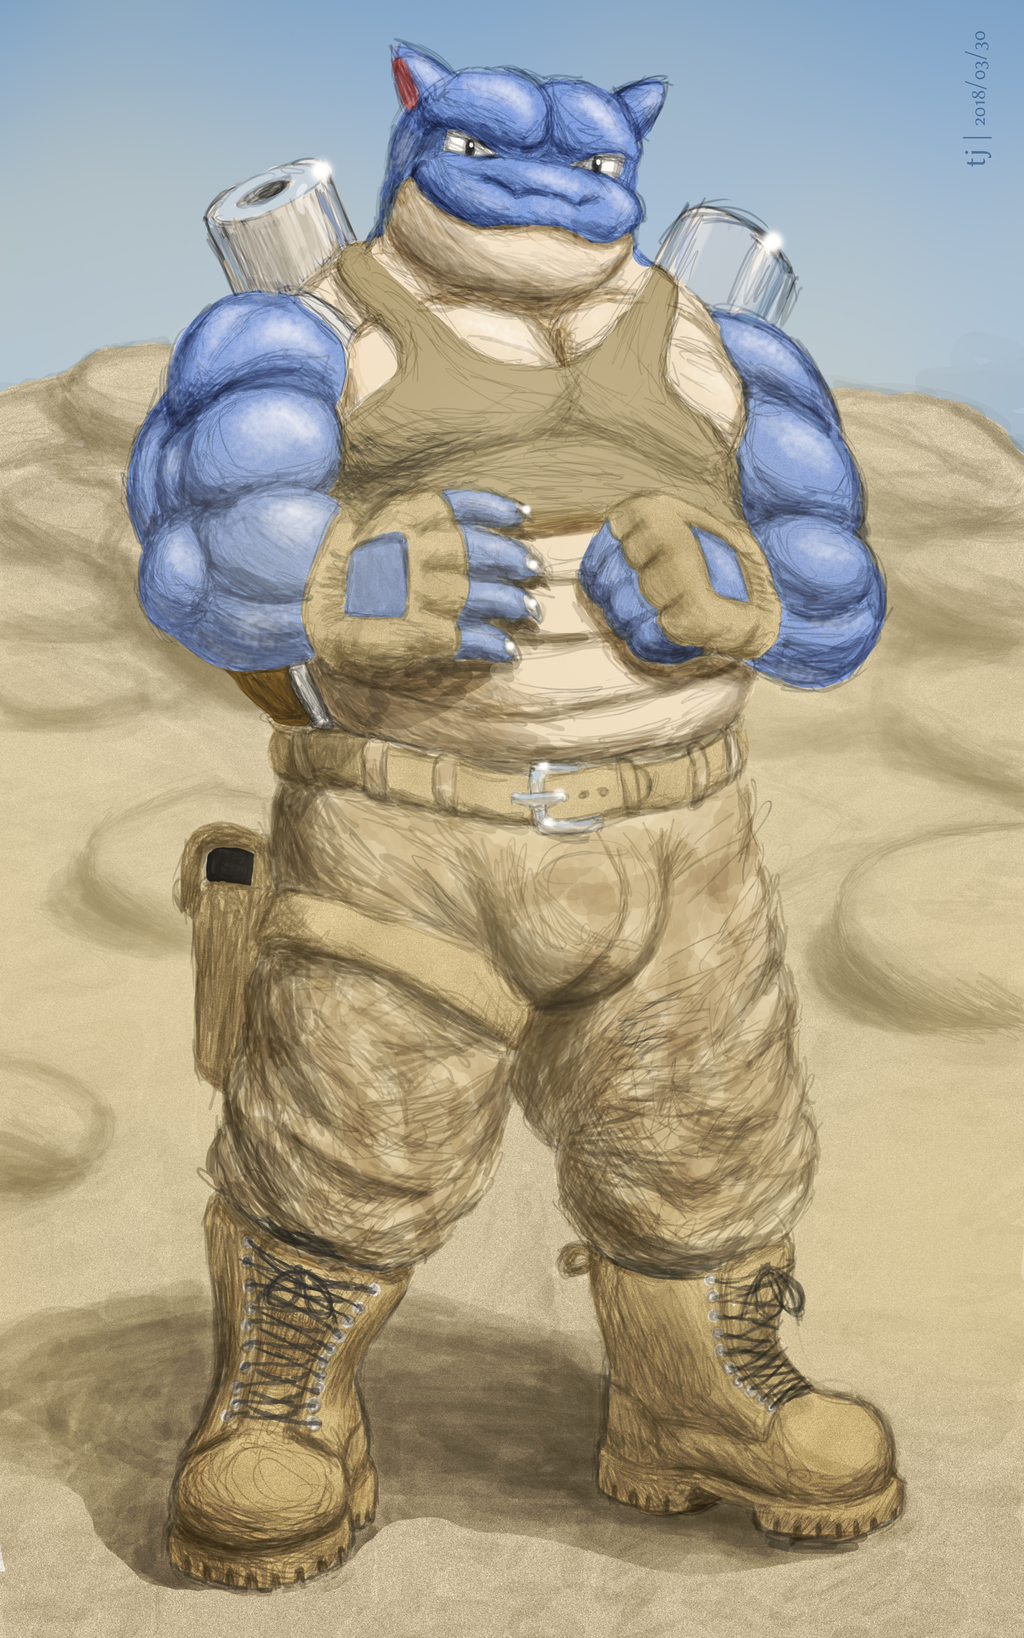 [Commission] Brox the Blastoise - Colored Sketch